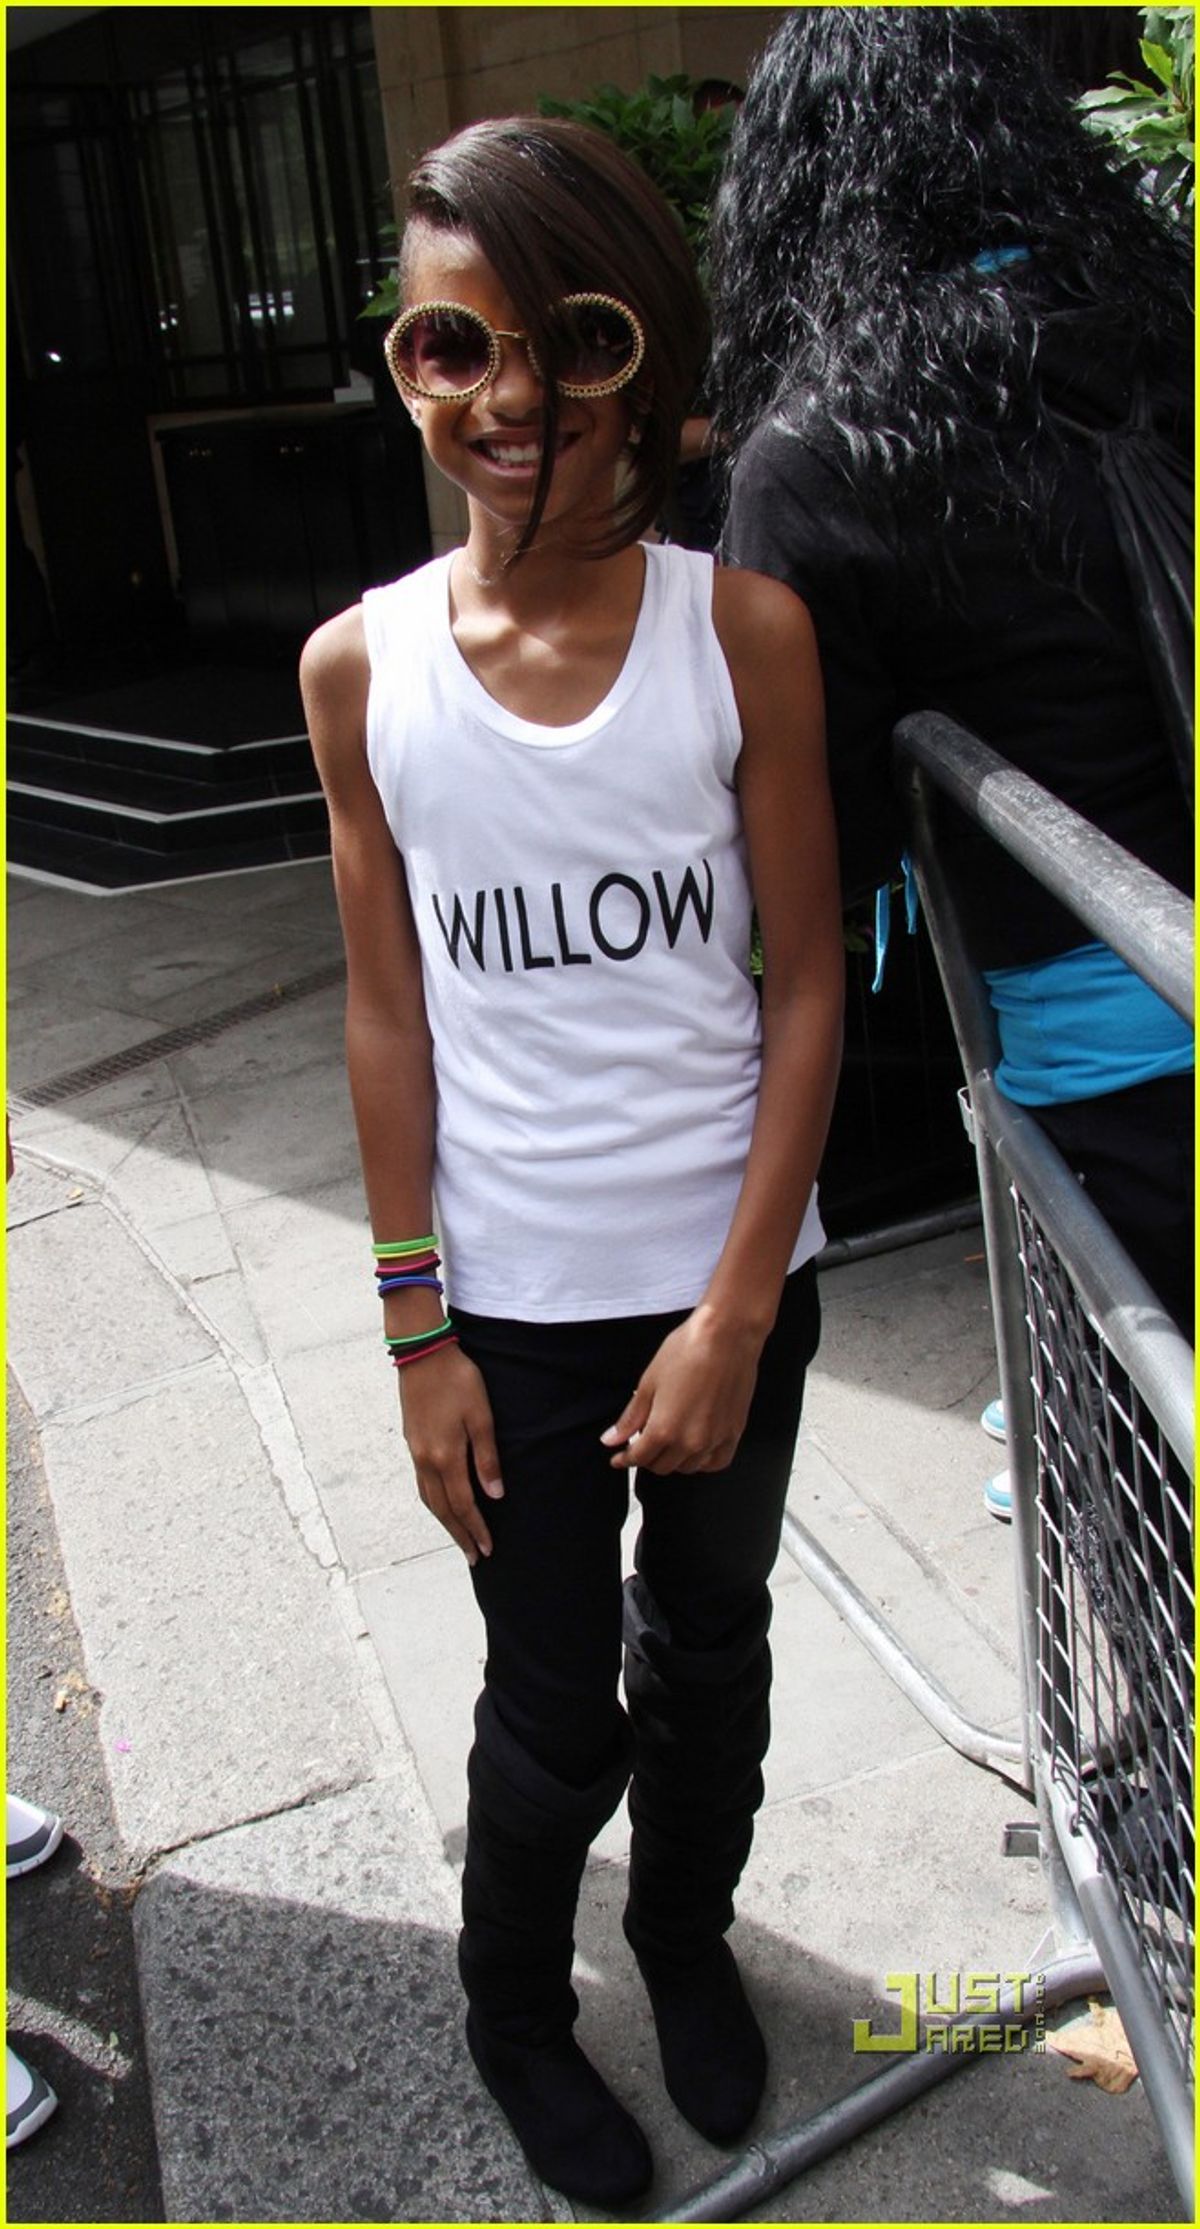 Willow Smith sighted leaving her hotel on July 17, 2010 in London, England.
Willow Smith Sighting In London - July 17, 2010
London, England United Kingdom
July 17, 2010
Photo by Simon James/FilmMagic.com

To license this image (61071633), contact FilmMagic.com (Simon James/filmmagic.com)